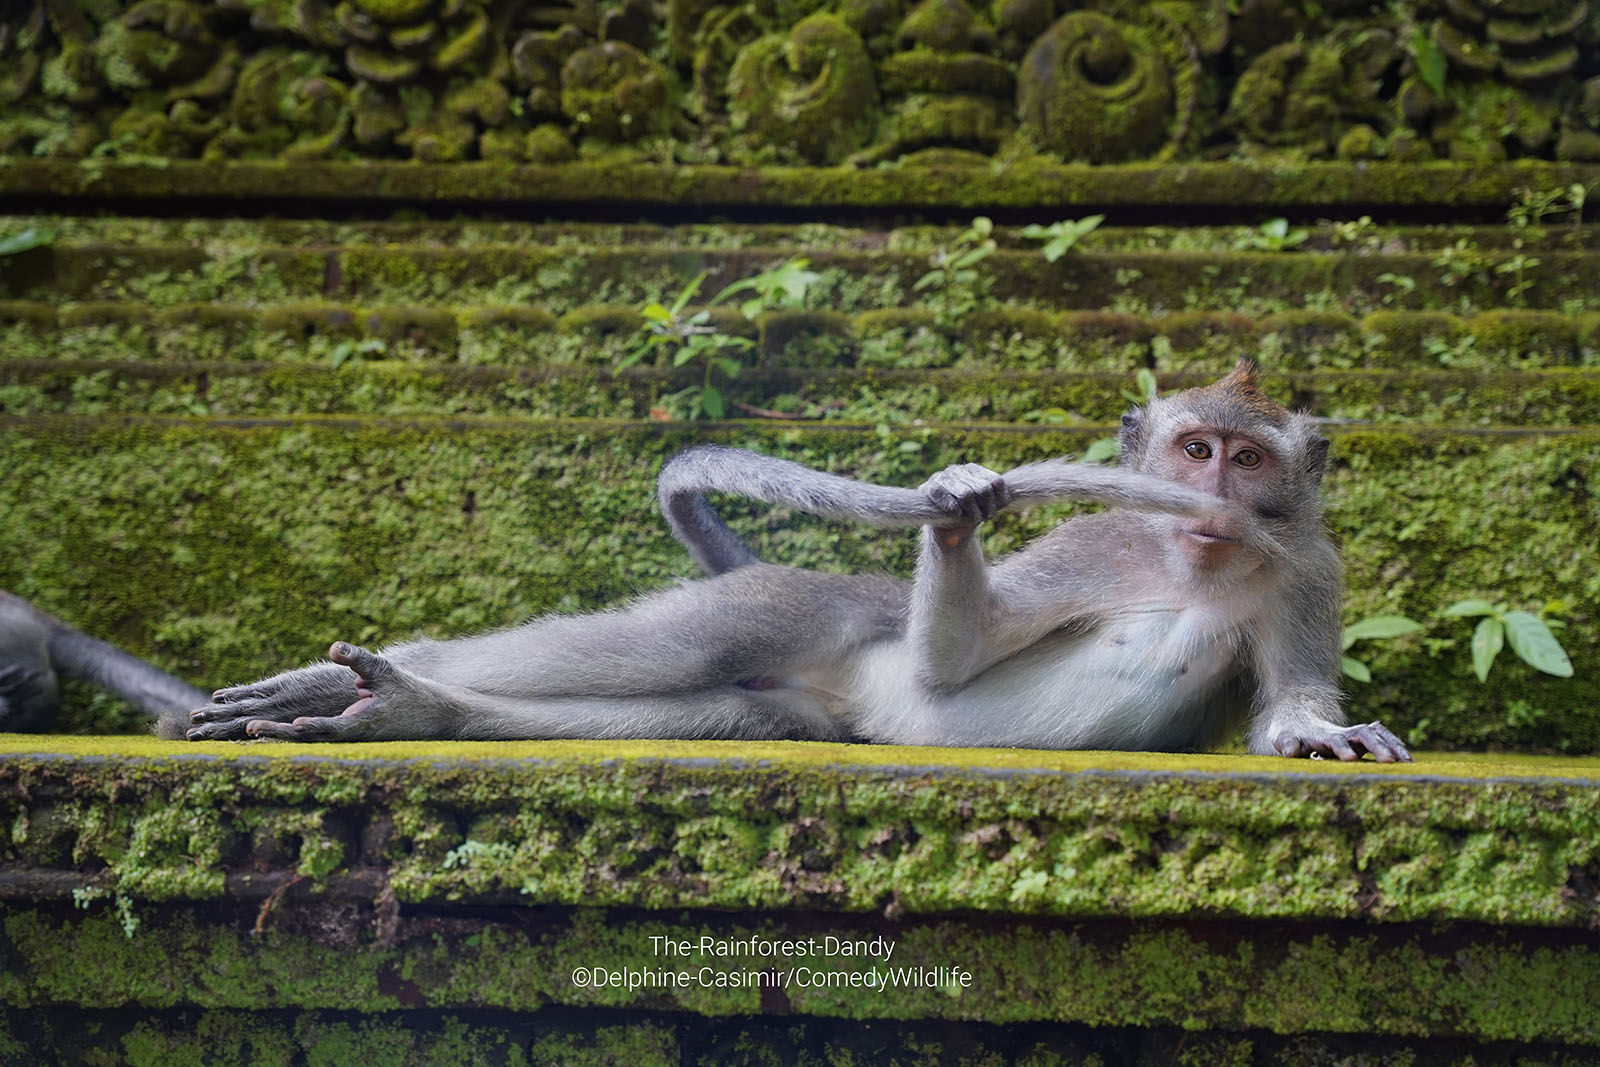 A monkey is Bali lays posing for the camera.